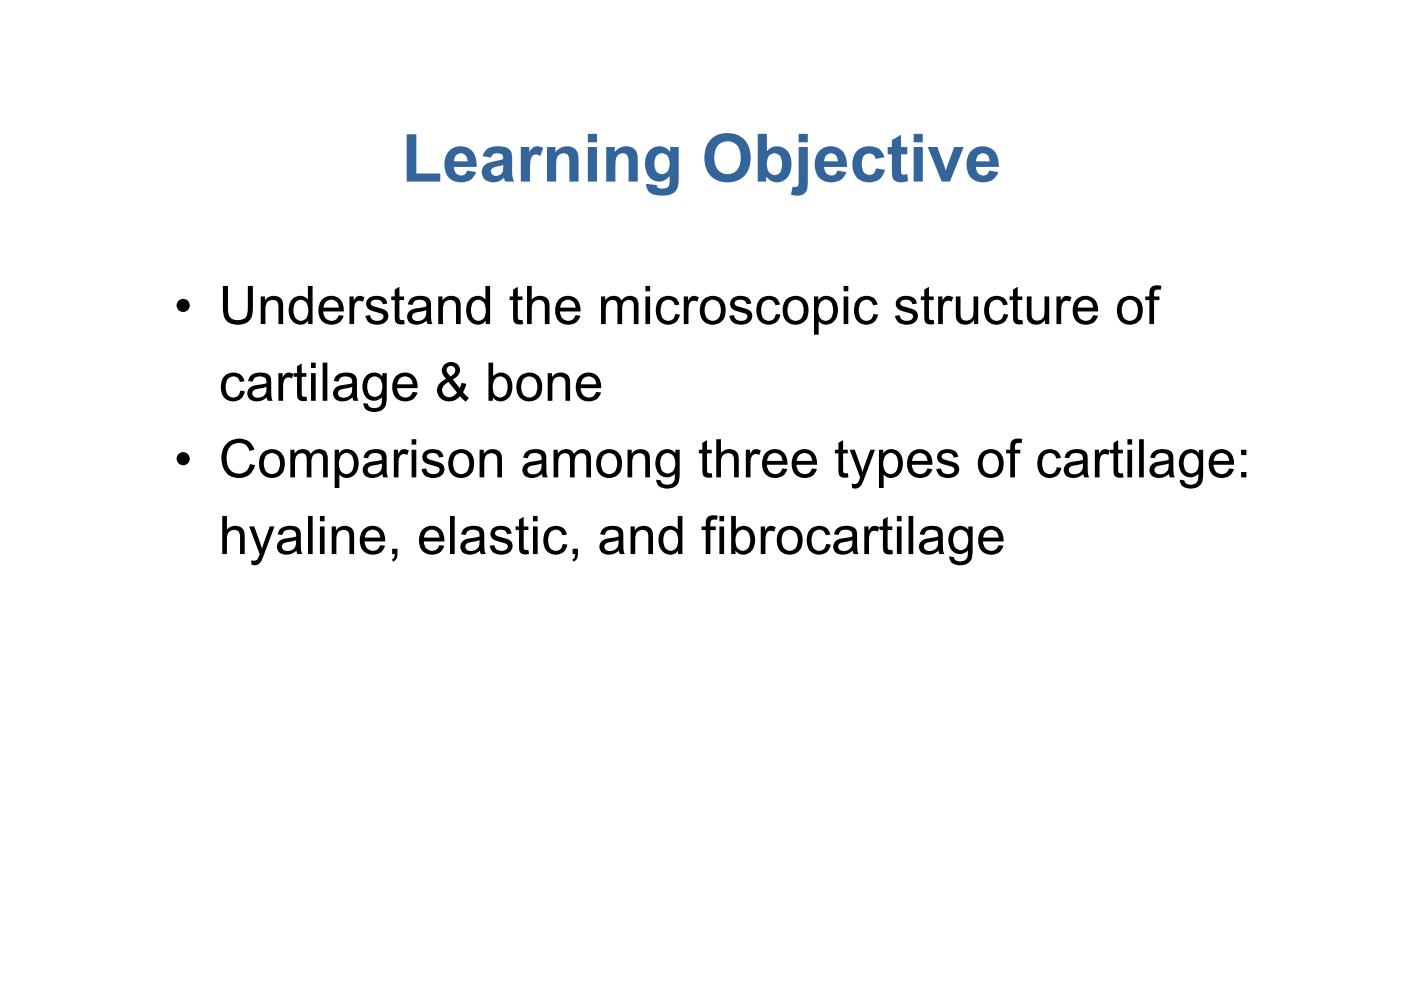 block6-1_04.jpg - Learning Objective¡E Understand the microscopic structure of  cartilage & bone¡E Comparison among three types of cartilage:  hyaline, elastic, and fibrocartilage